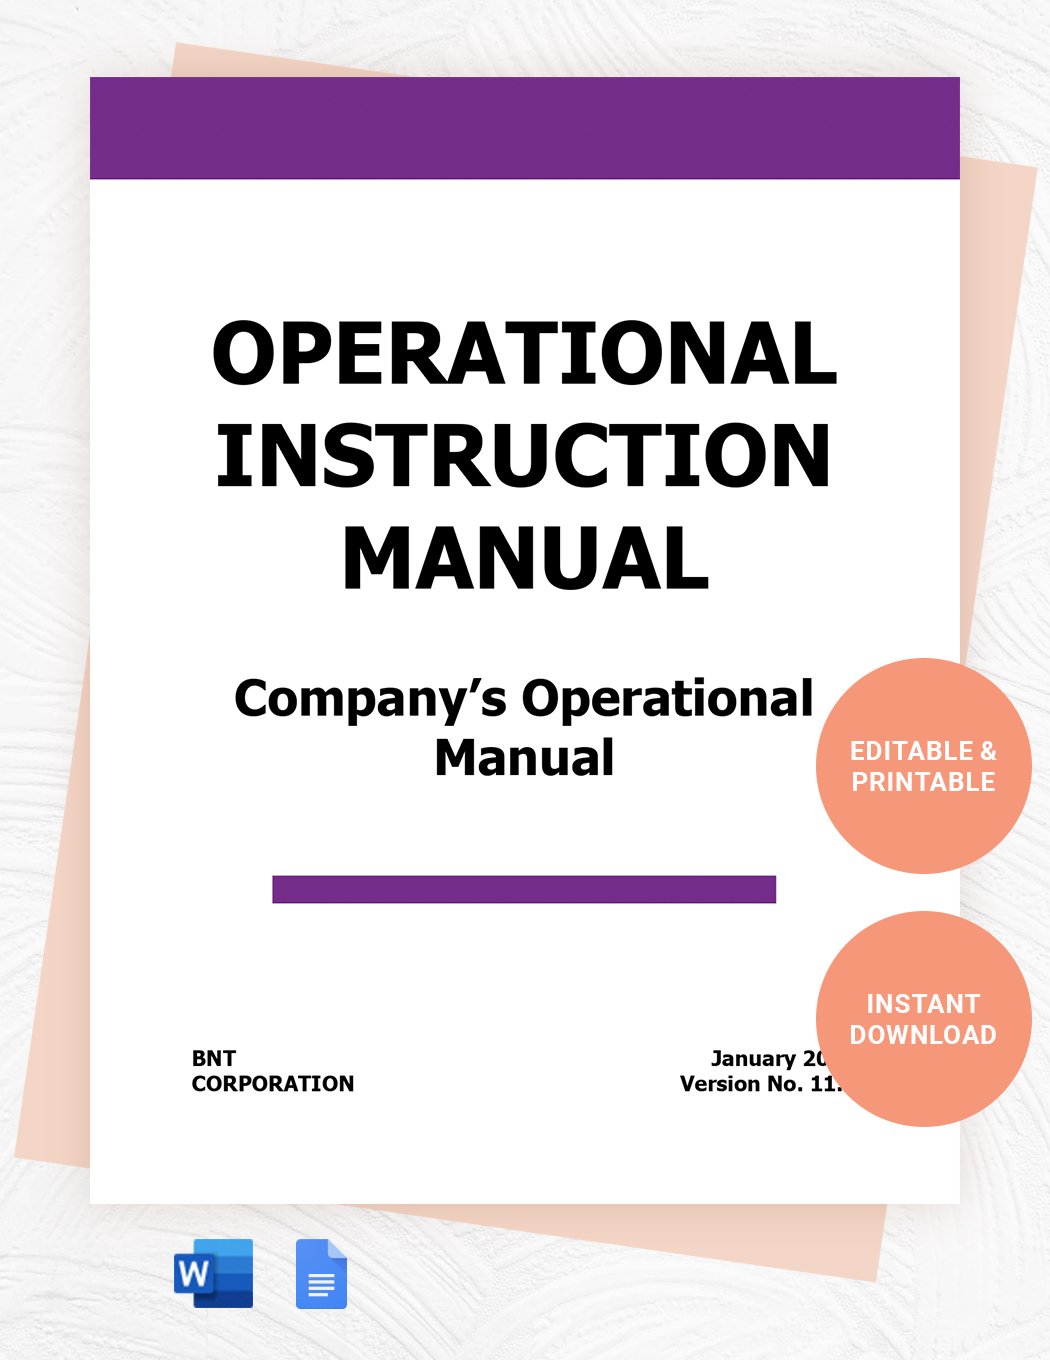 Operational Instruction Manual Template